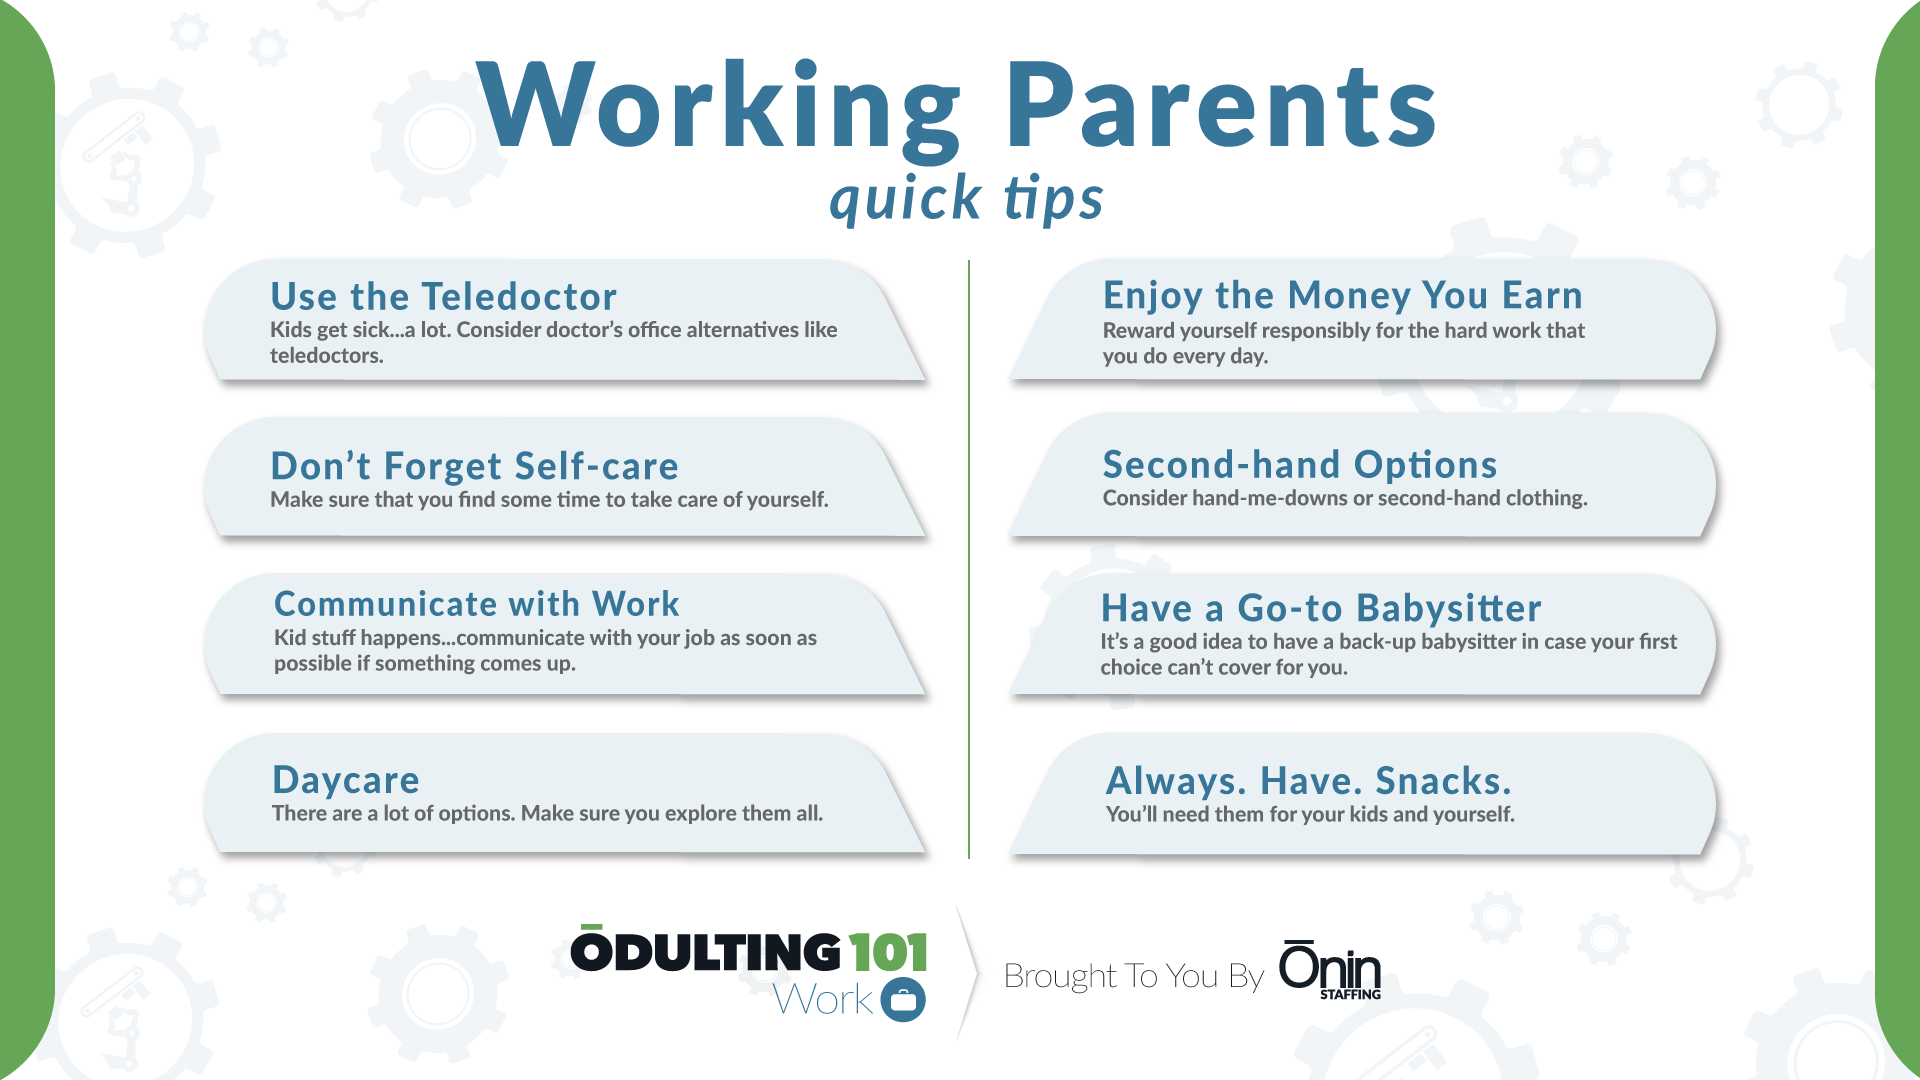 202006_IB_Working Parents Infographic_DIG_Final